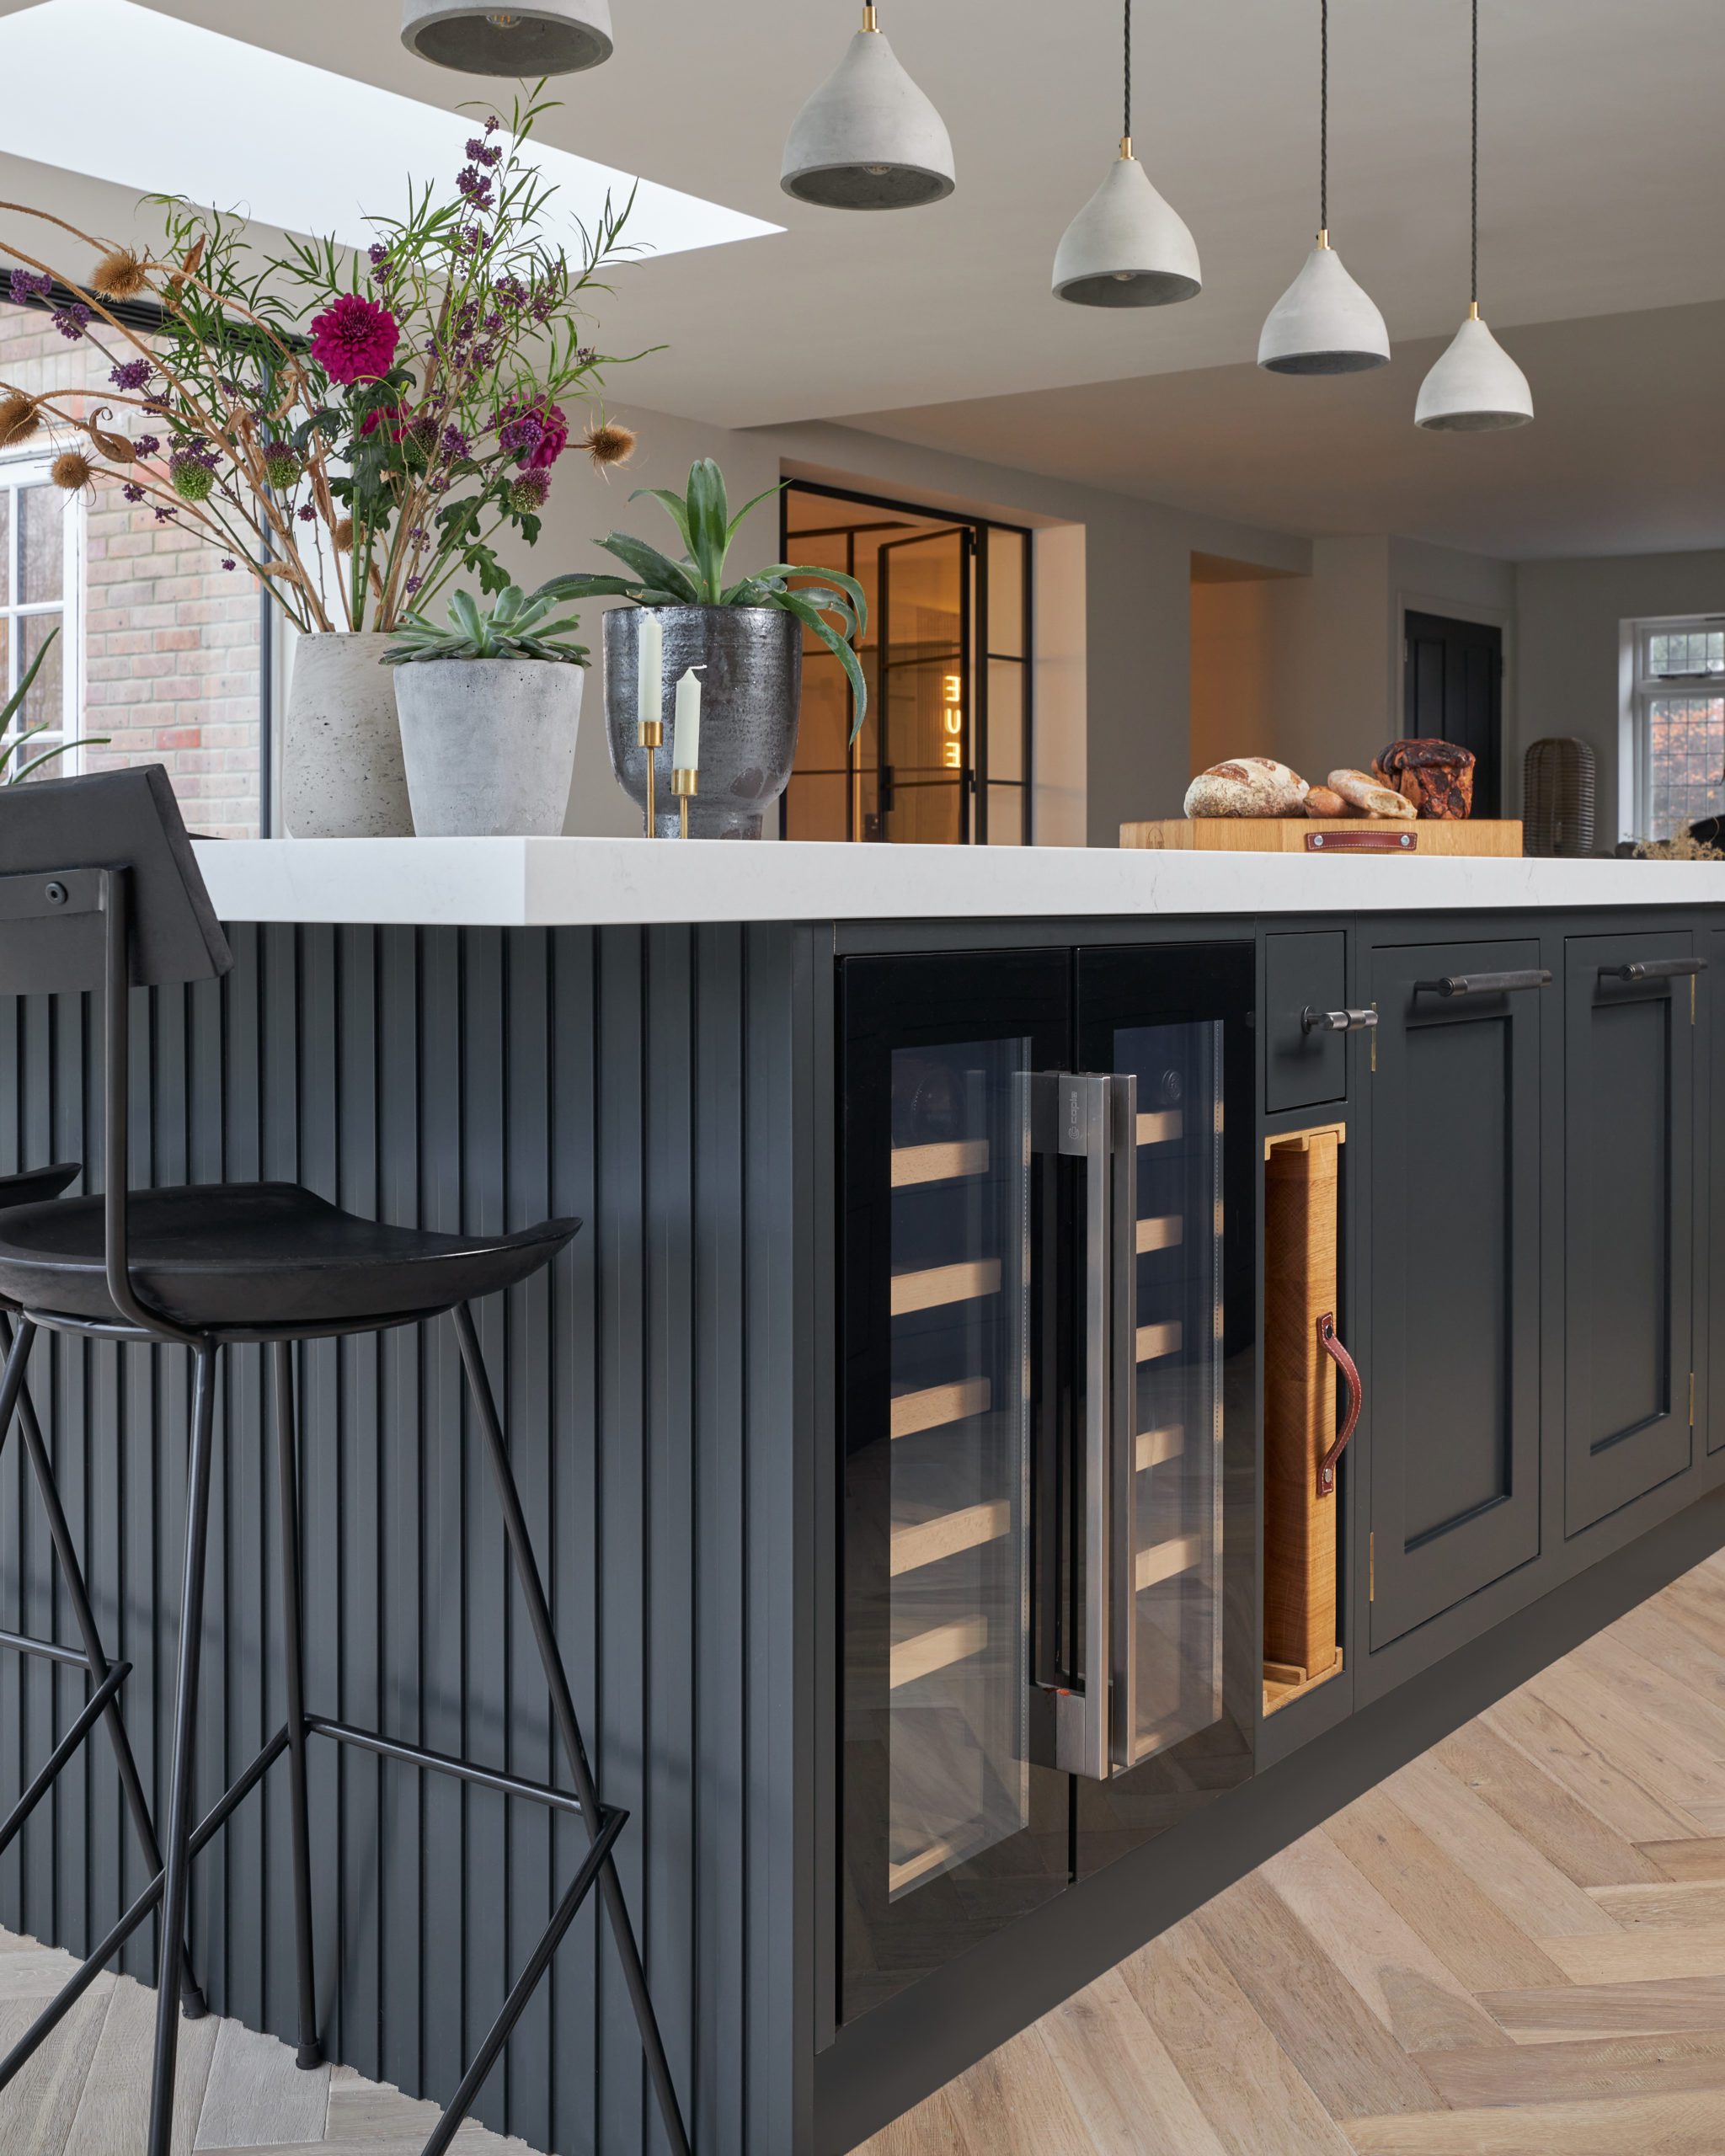 John Lewis of Hungerford luxury Shaker kitchen with grey kitchen island with wine cooler